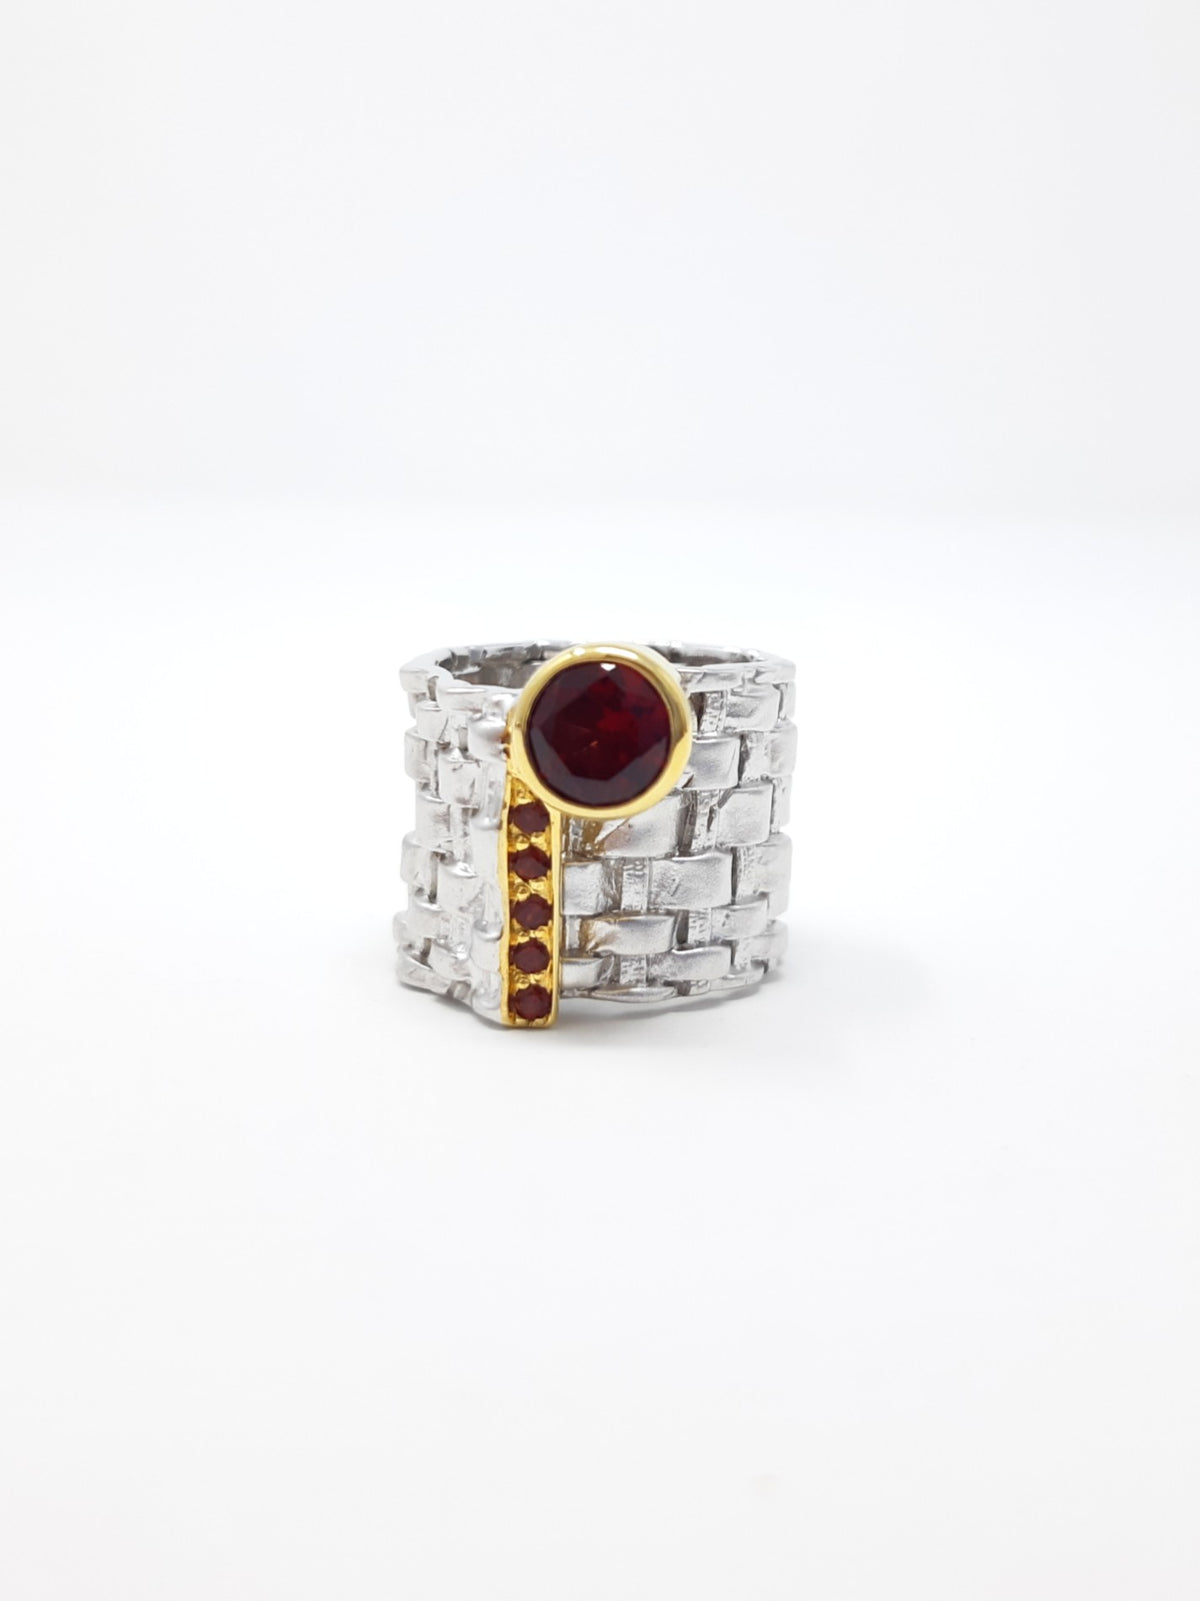 2 Tone Silver &amp; Gold Plated Garnet Ring, size 8